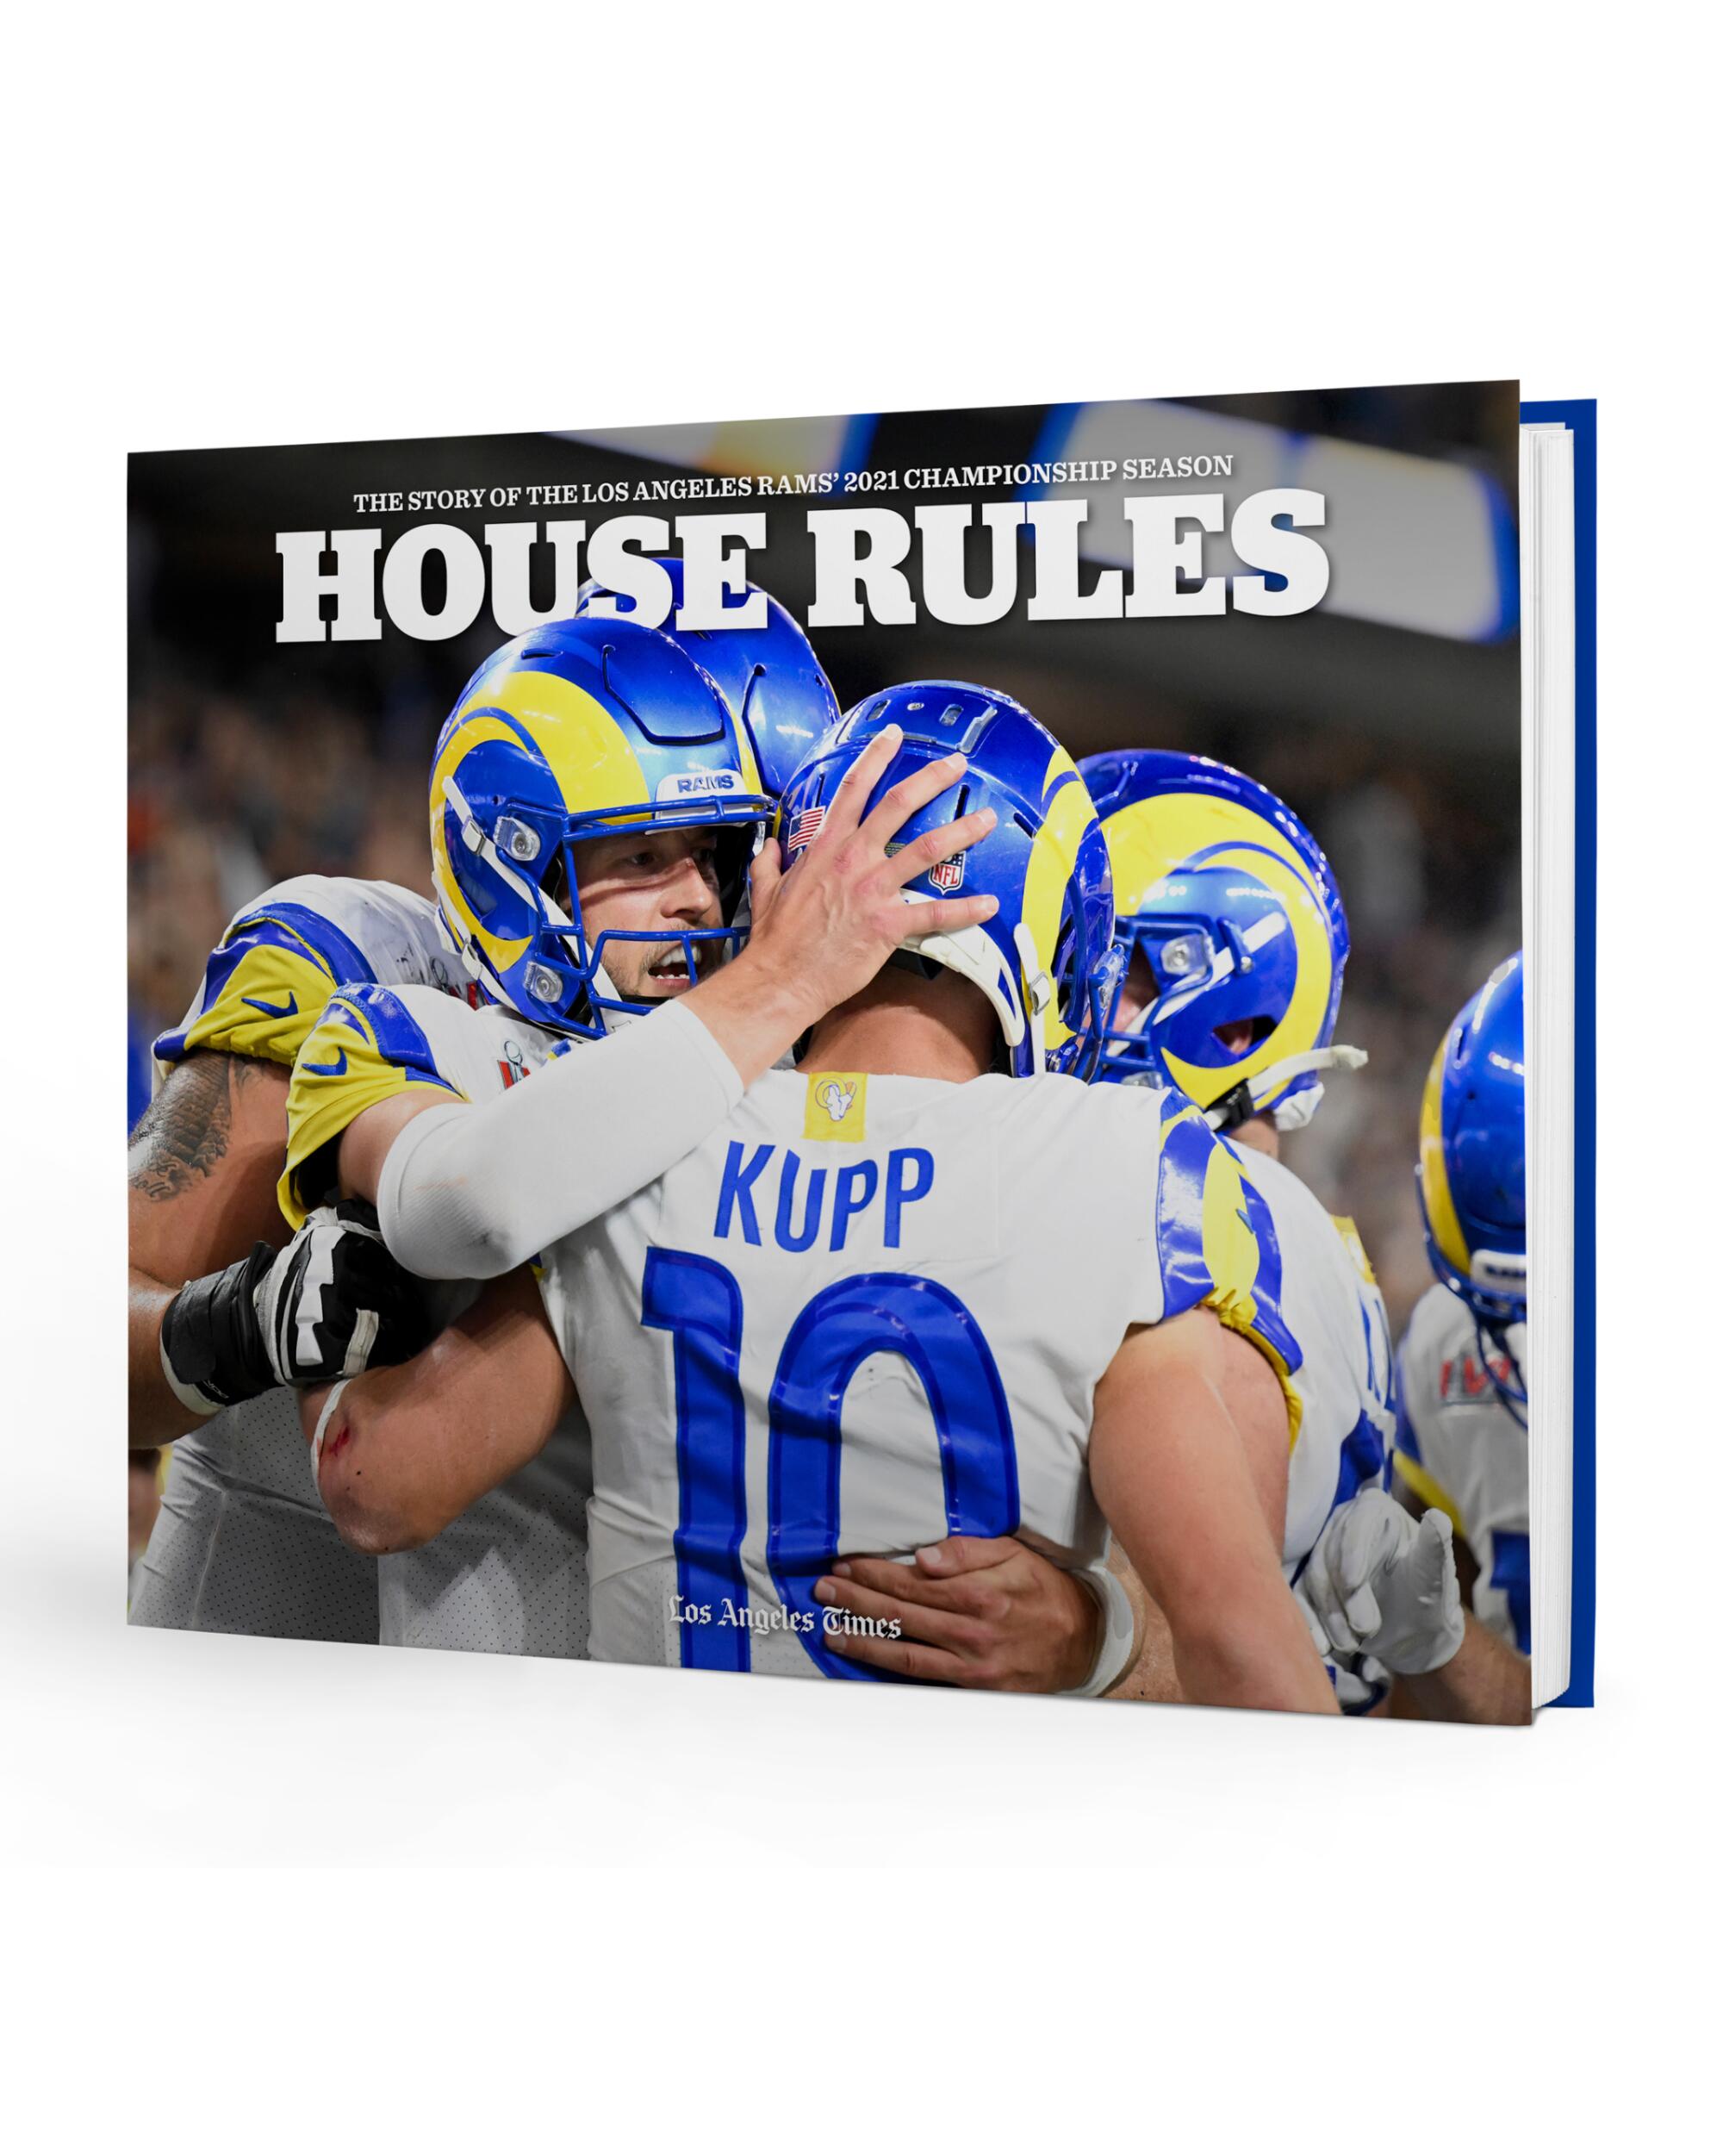 A book with a cover photo of Rams wide receiver Cooper Kupp and his teammates embracing